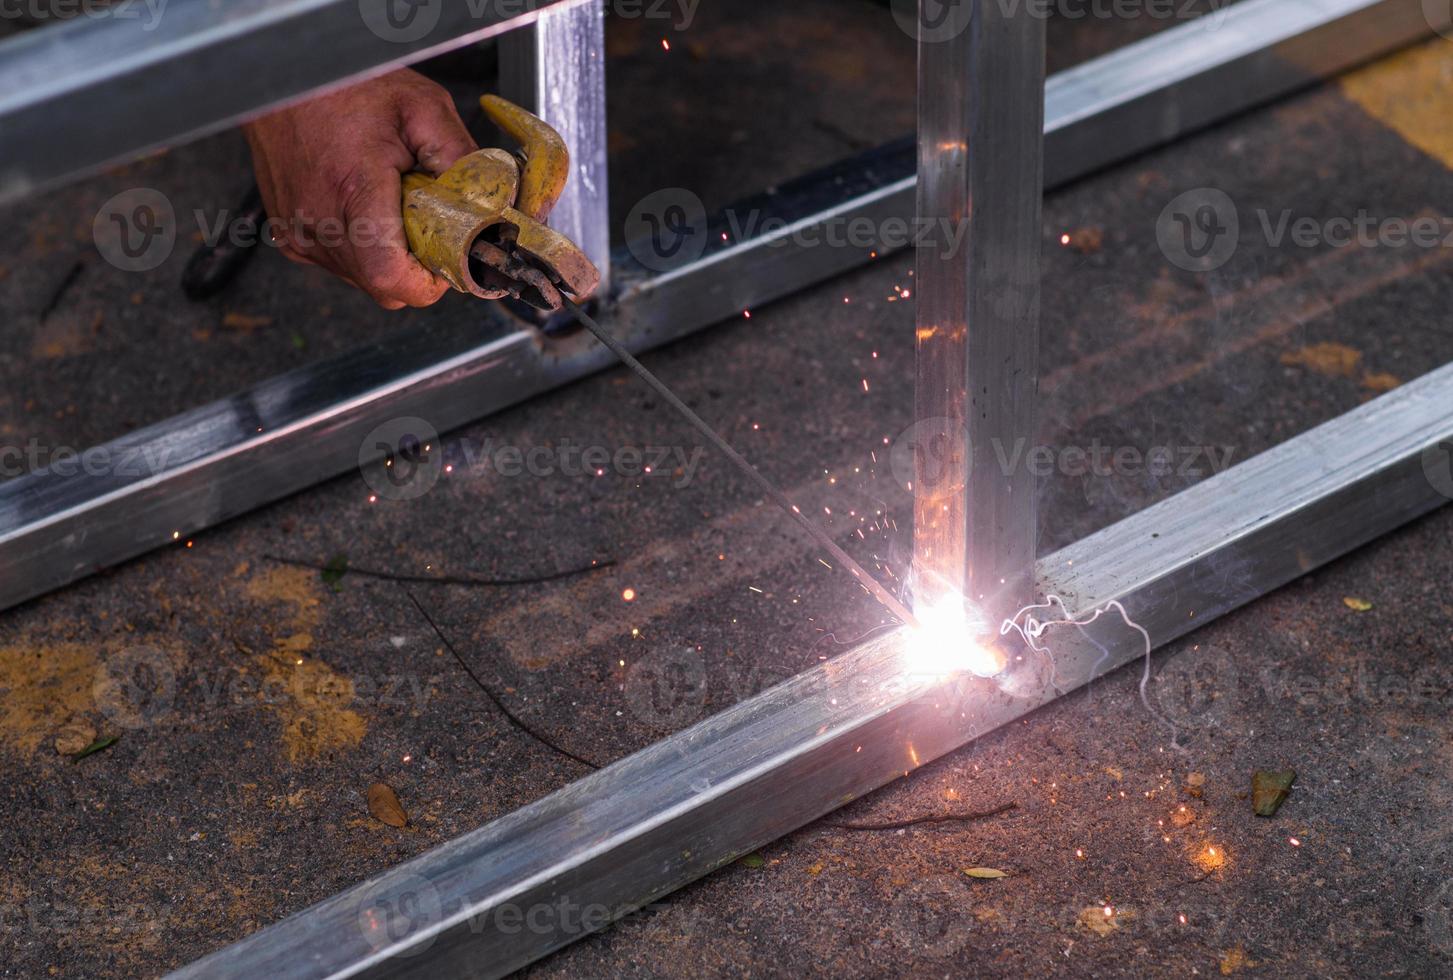 Arc welding of a steel at work site photo